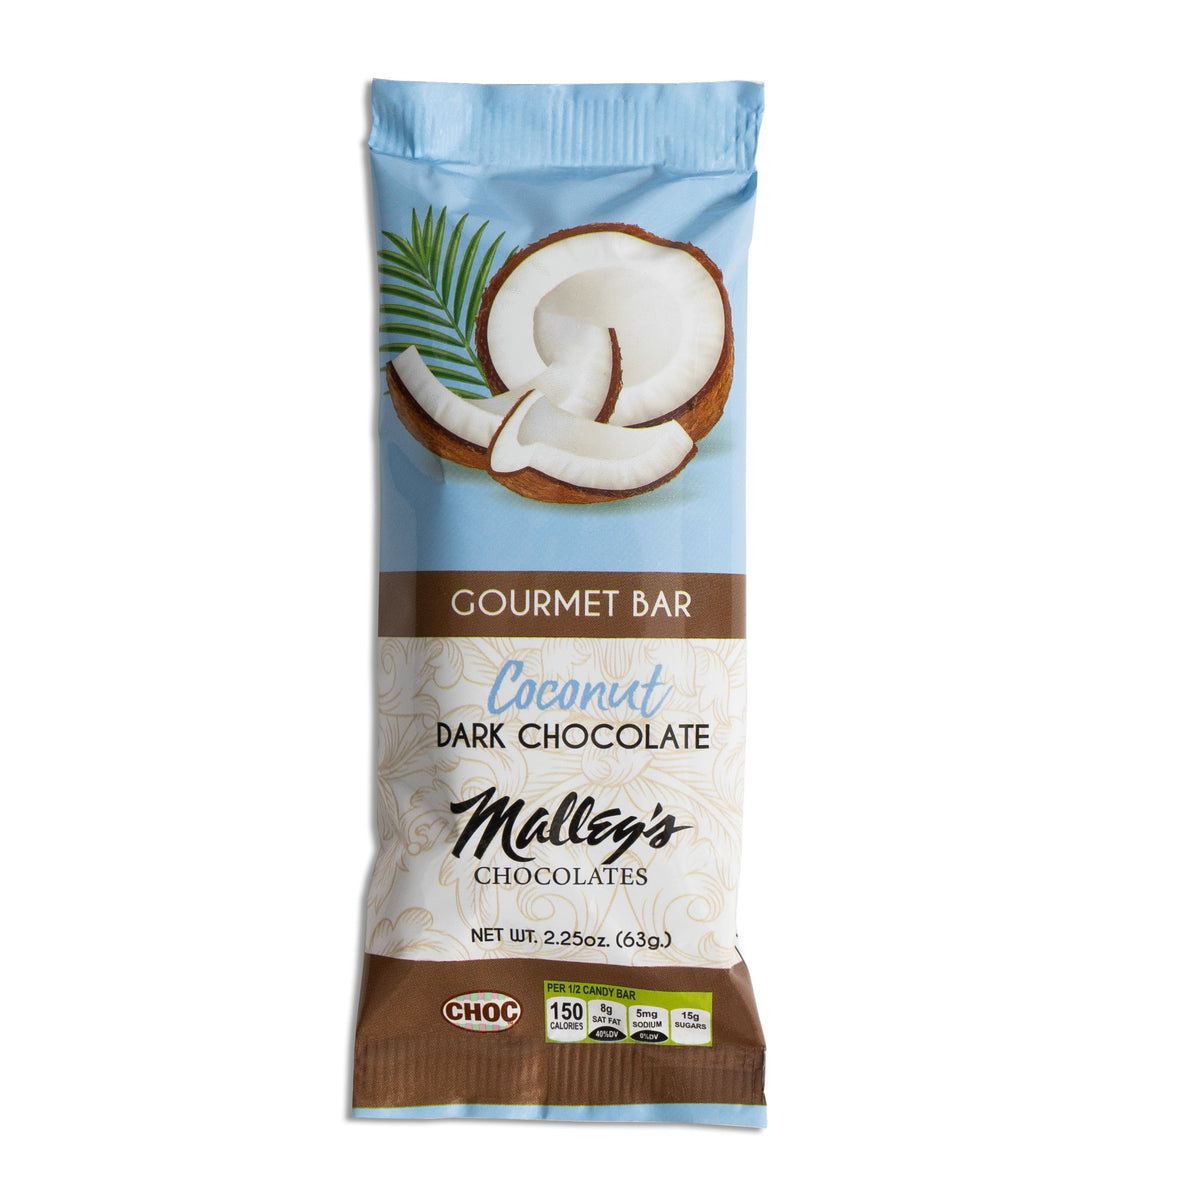 Coconut Gold Bars - All Products